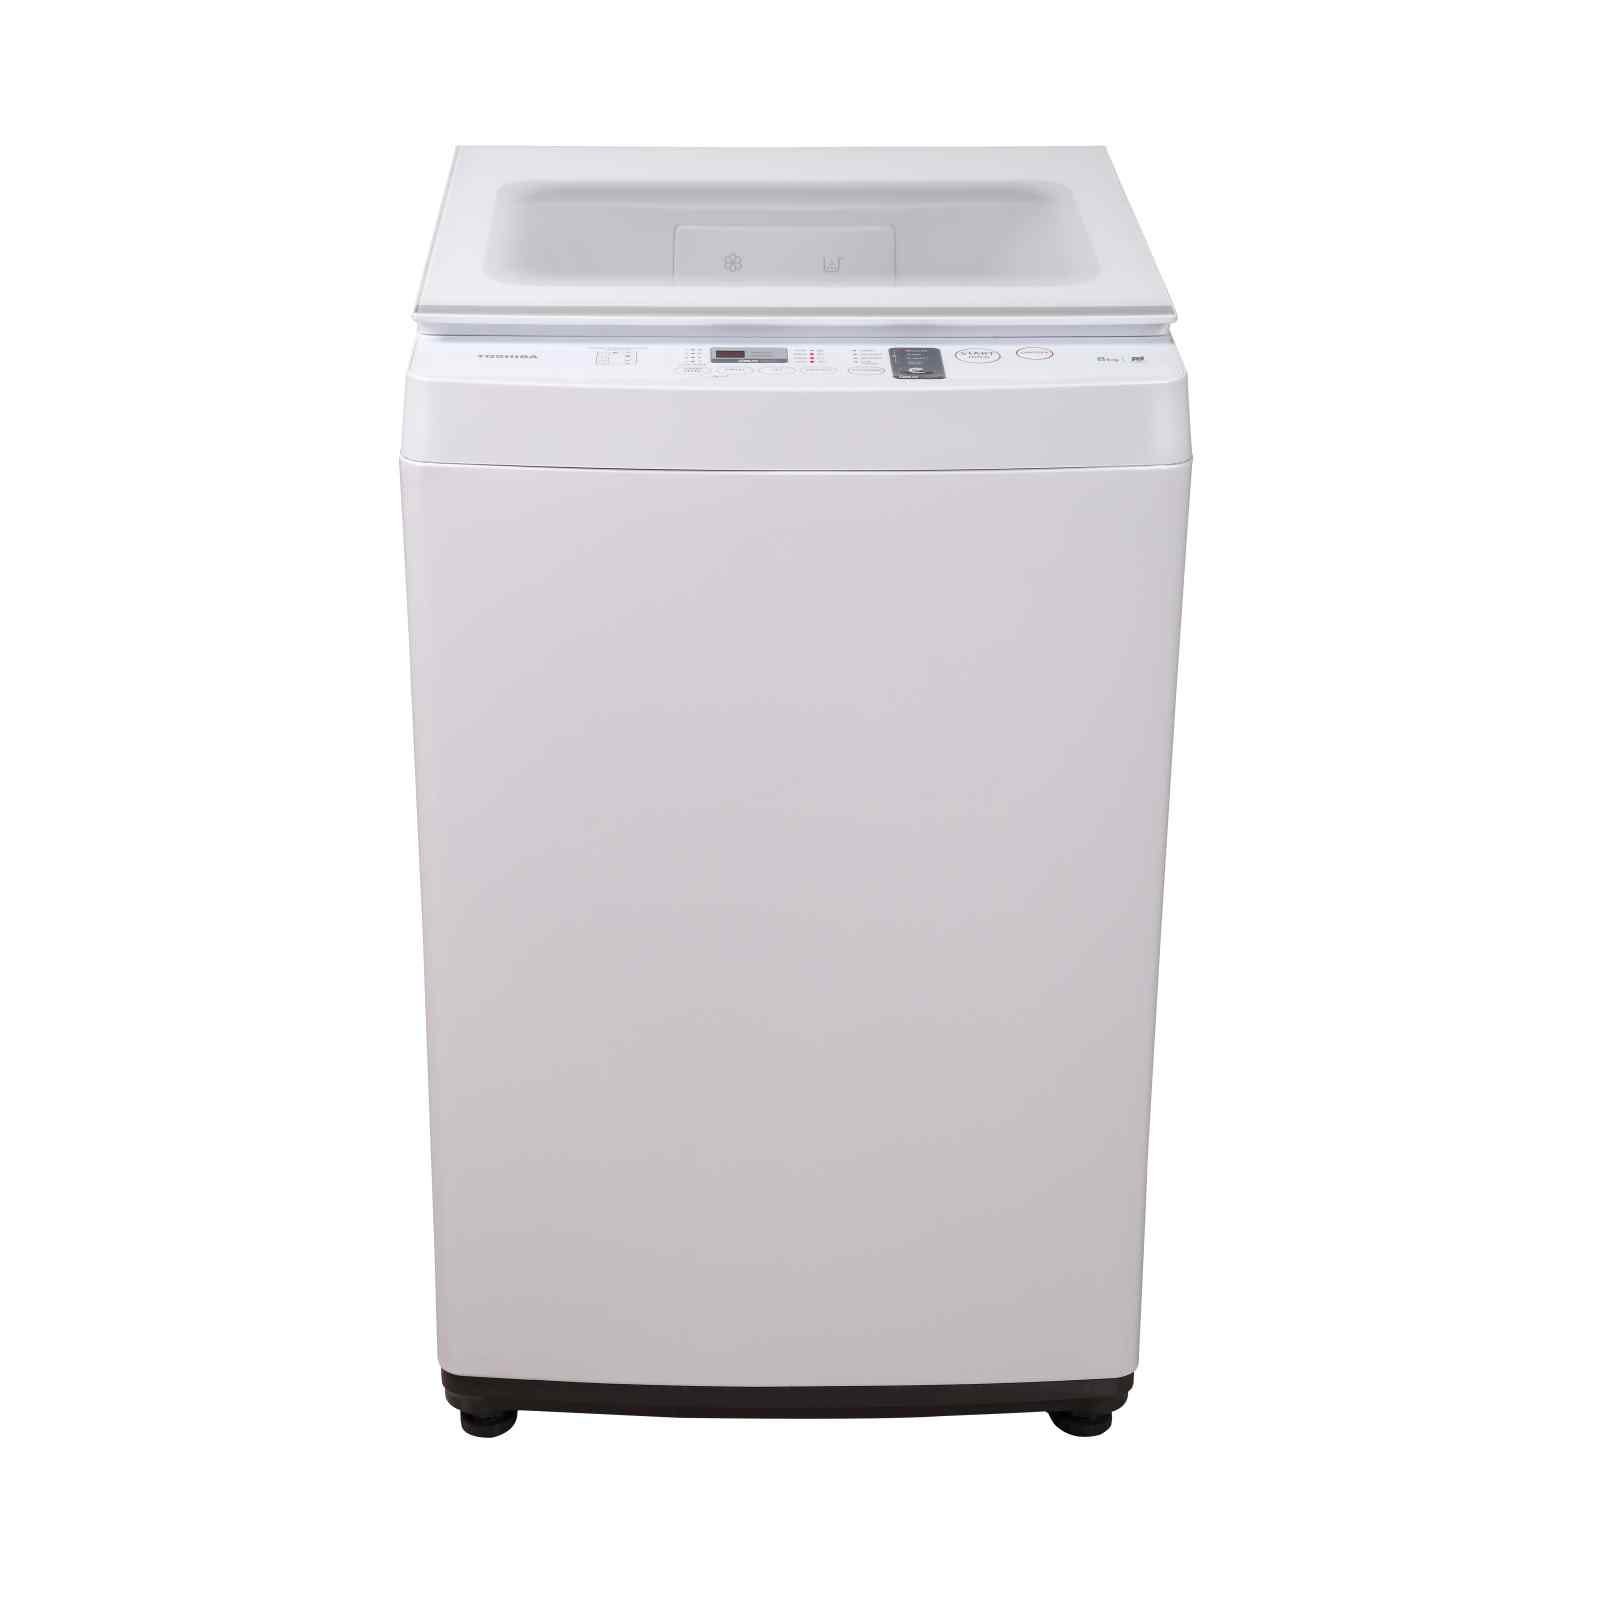 10 Best Top Load Washing Machines in Singapore From 248 (2020)